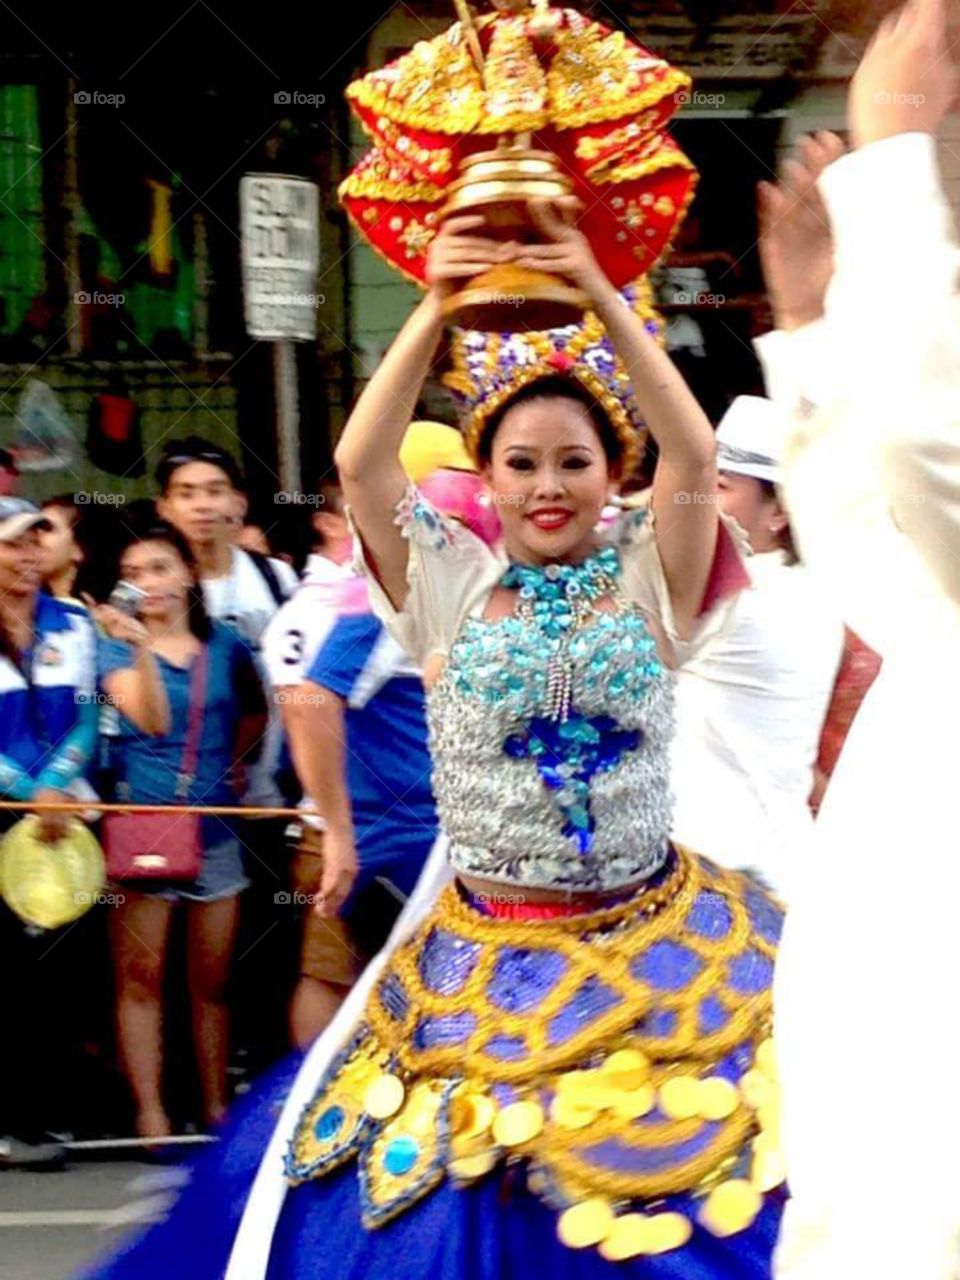 colorful dance of a festival queen
Sinulog 2015